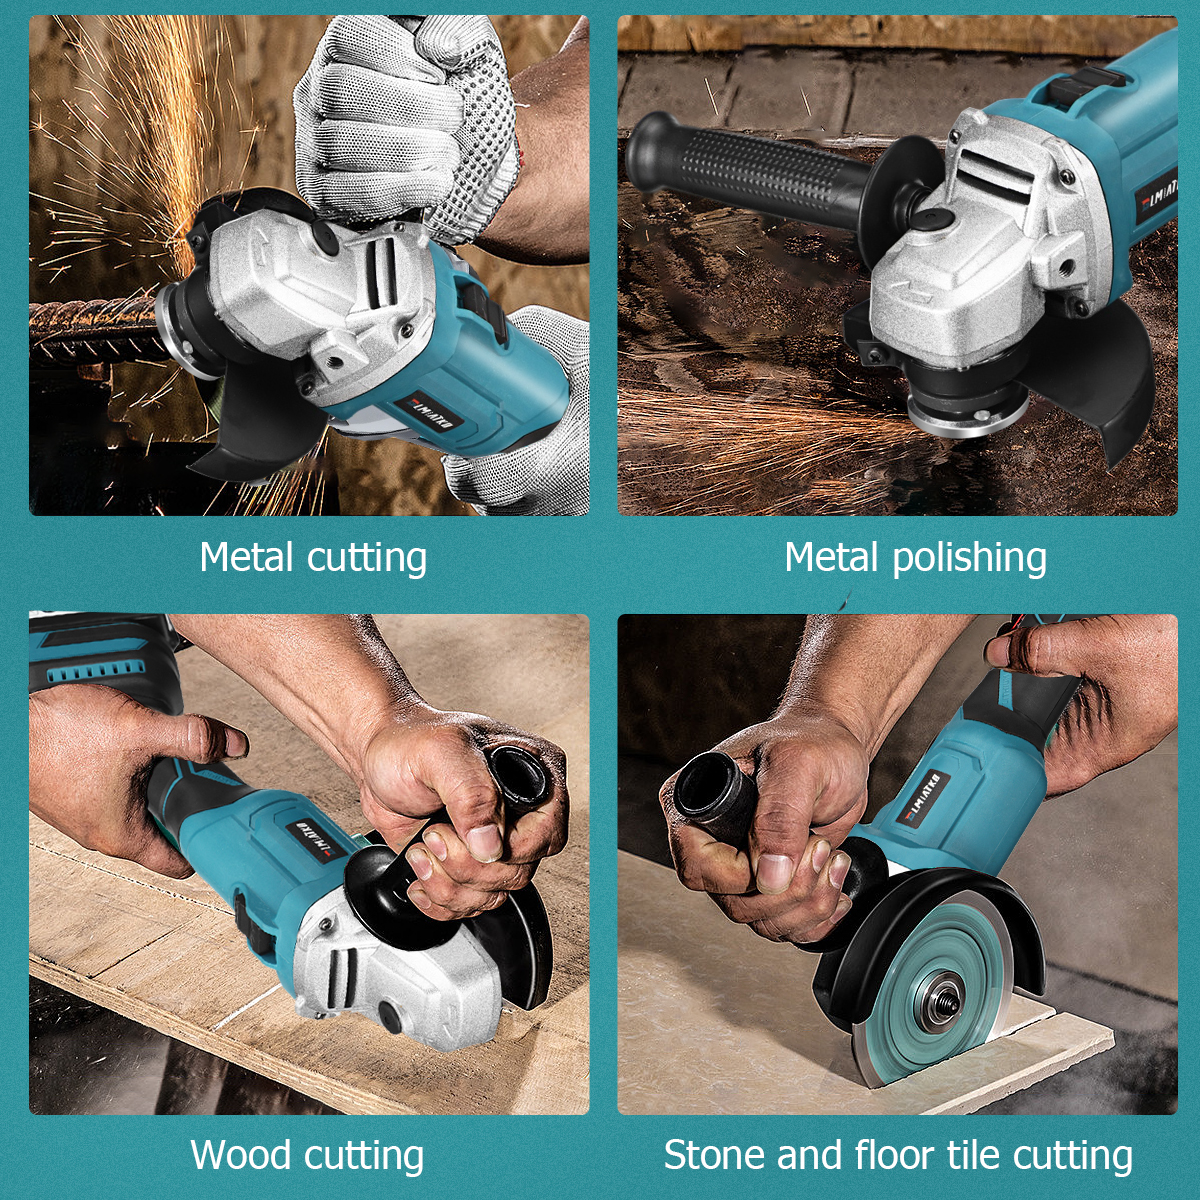 BLMIATKO-220V-125MM-100MM-34-Speed-Brushless-Electric-Angle-Grinder-Cutting-Grinding-Machine-Power-T-1943200-23